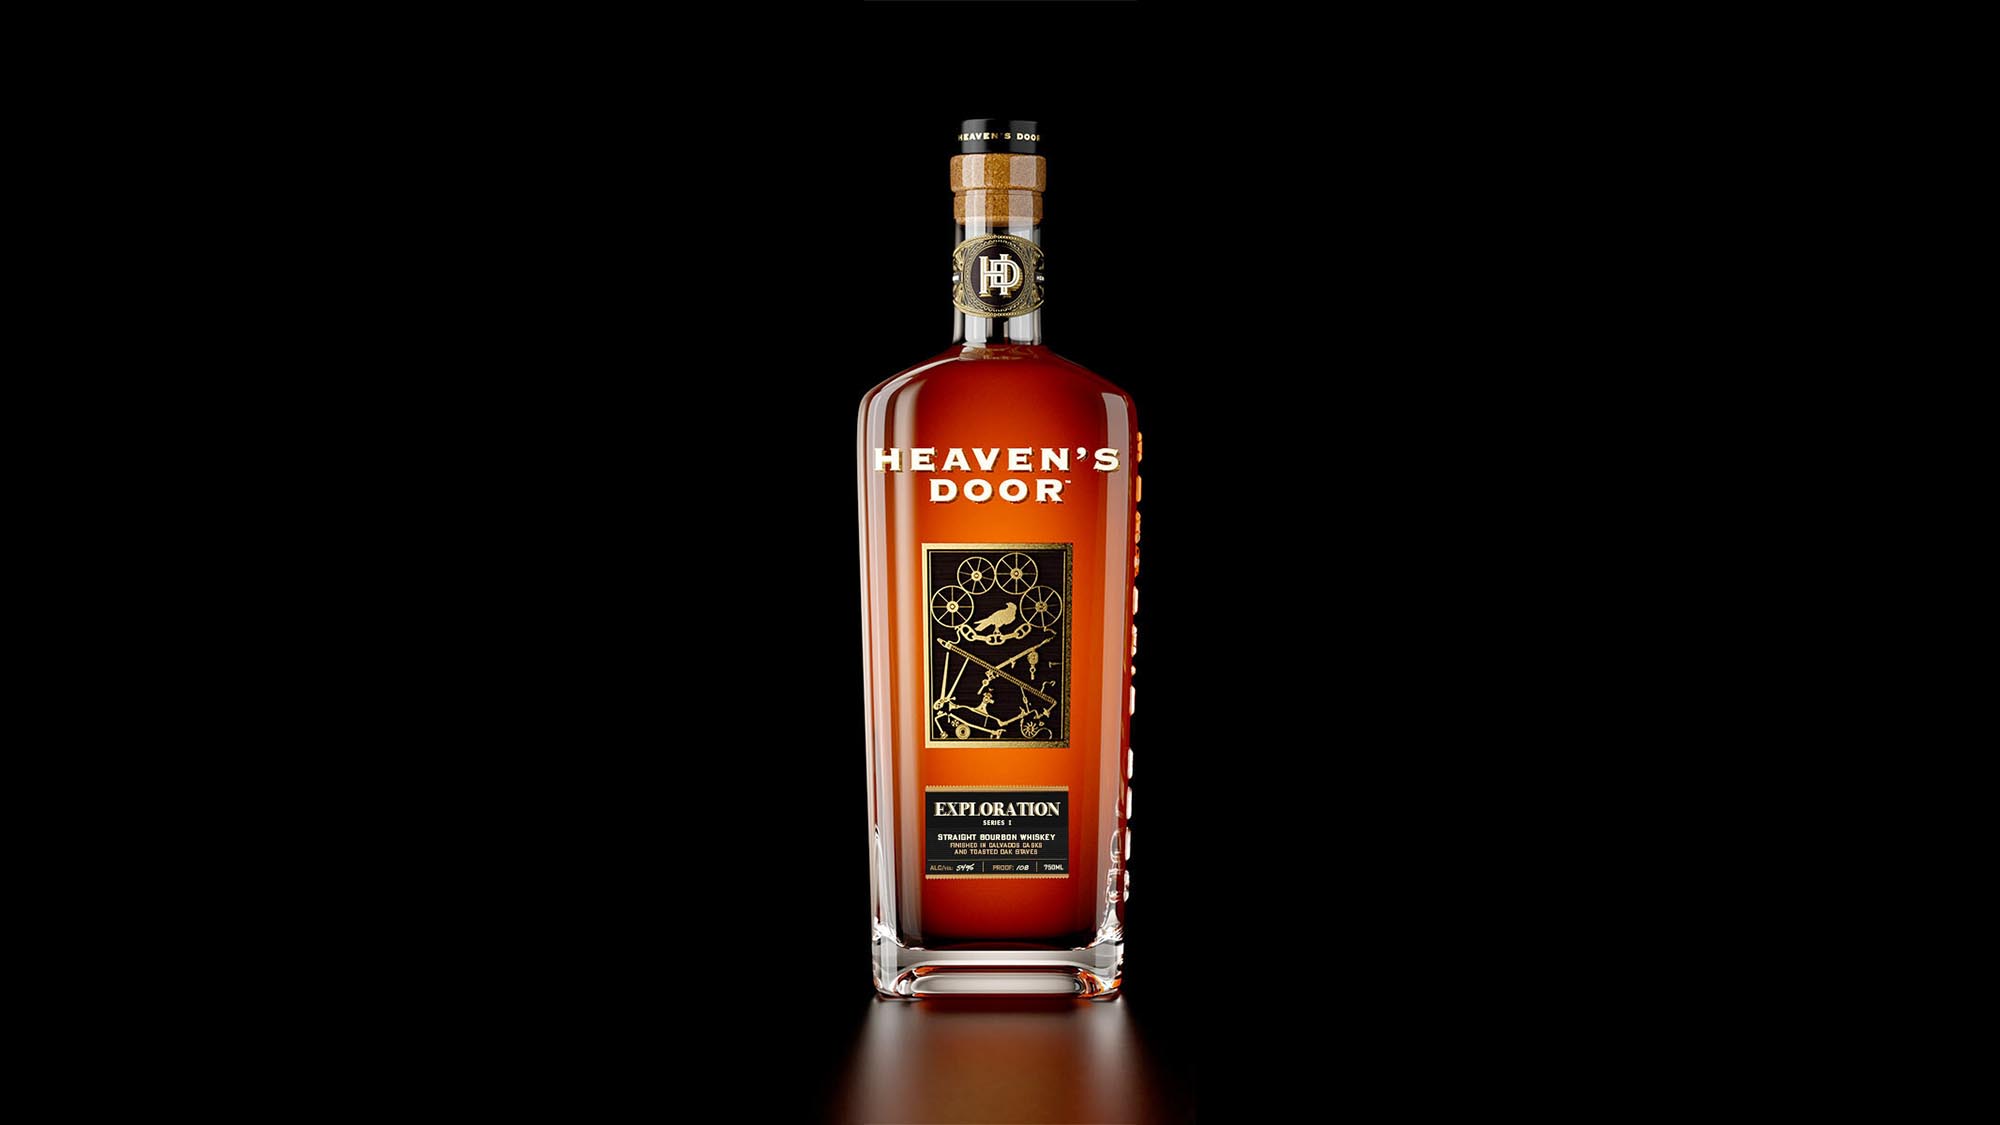 Bob Dylan’s Heaven’s Door Launches The Exploration Series with Tennessee Whiskey Aged in Calvados Barrels